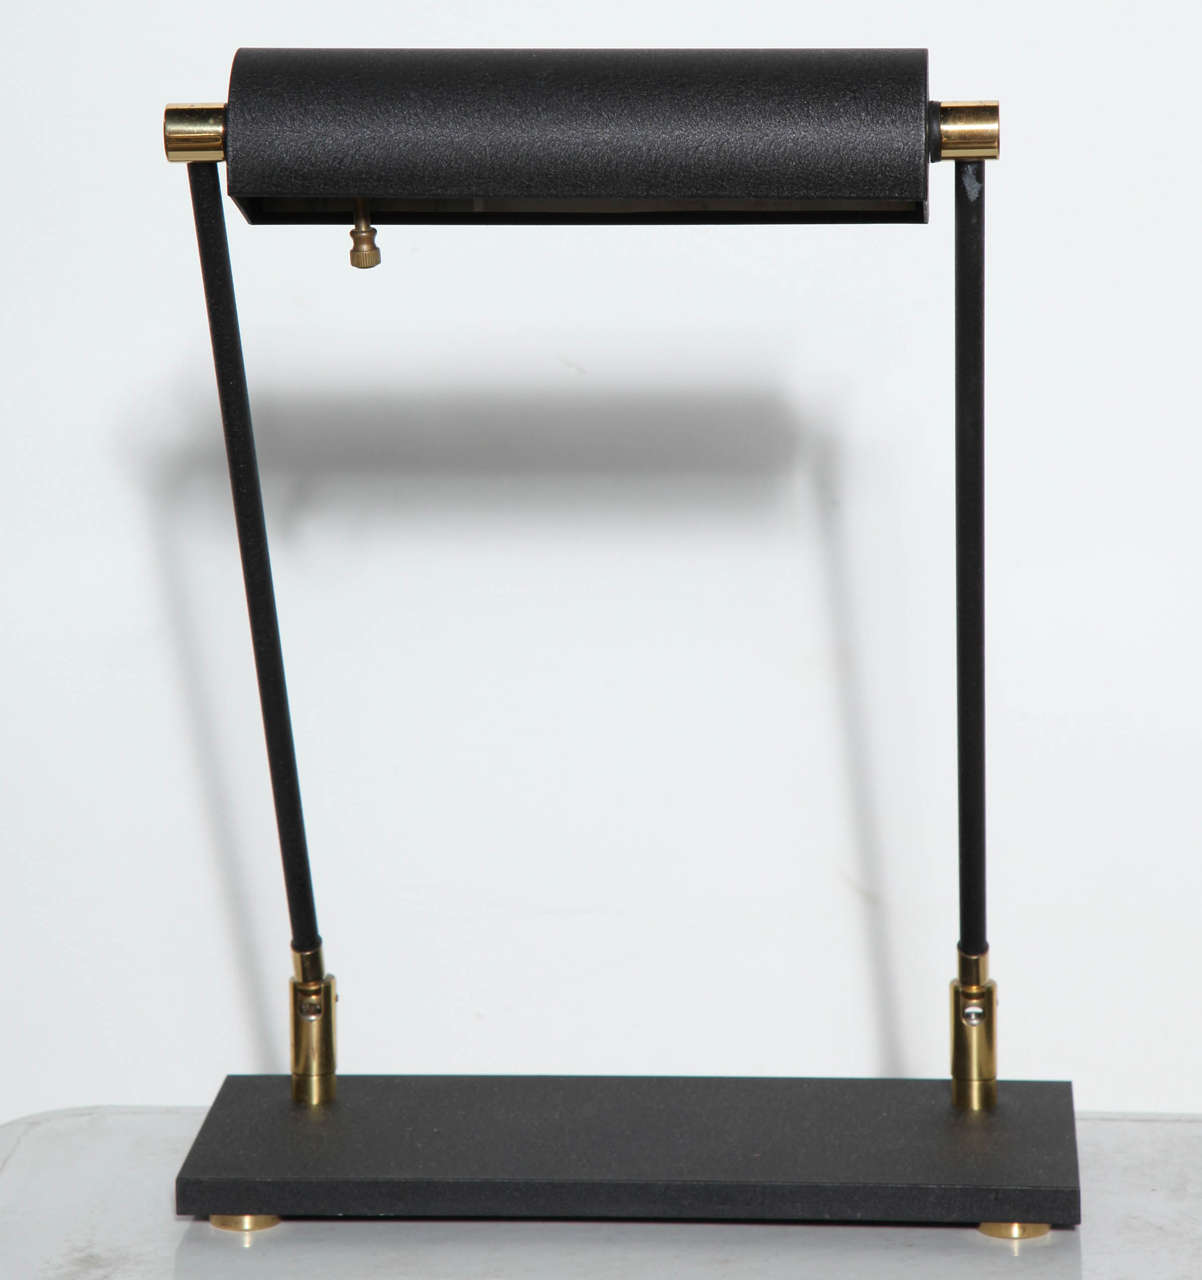 Midcentury Industrial style double pedestal and double stem Piano Lamp or Pharmacy Lamp with Black enameled articulating Shade atop a rectangular textured Black paint surface with four rounded Brass feet and textured Black articulating rheostat